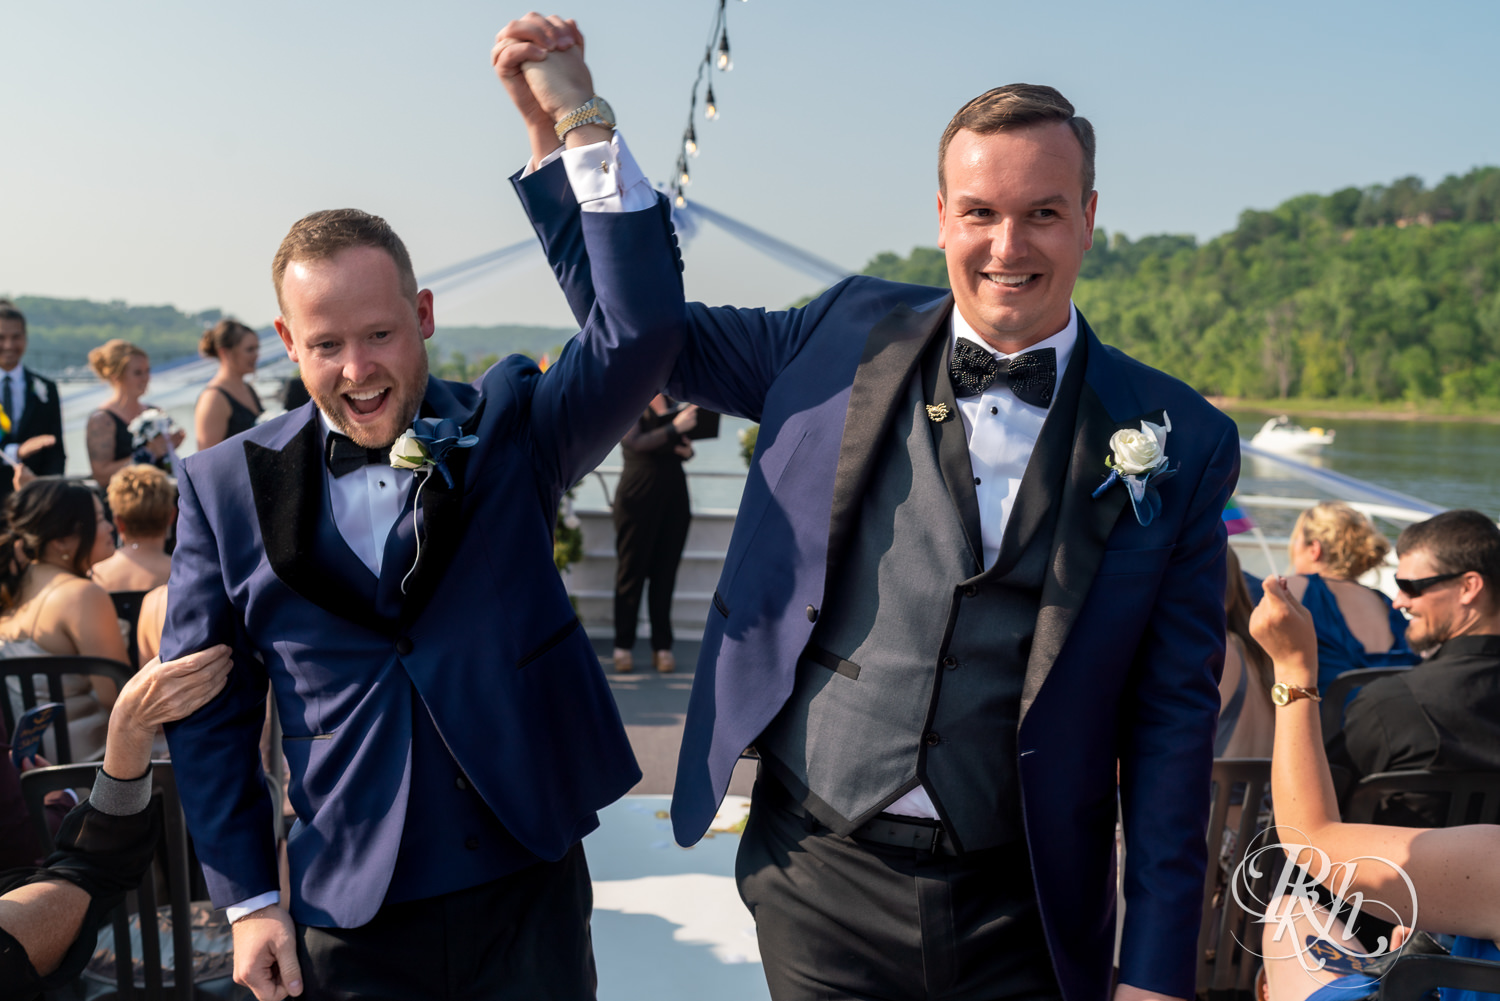 Grooms cheer after wedding ceremony on the Majestic Star by Stillwater River Boats in Stillwater, Minnesota.